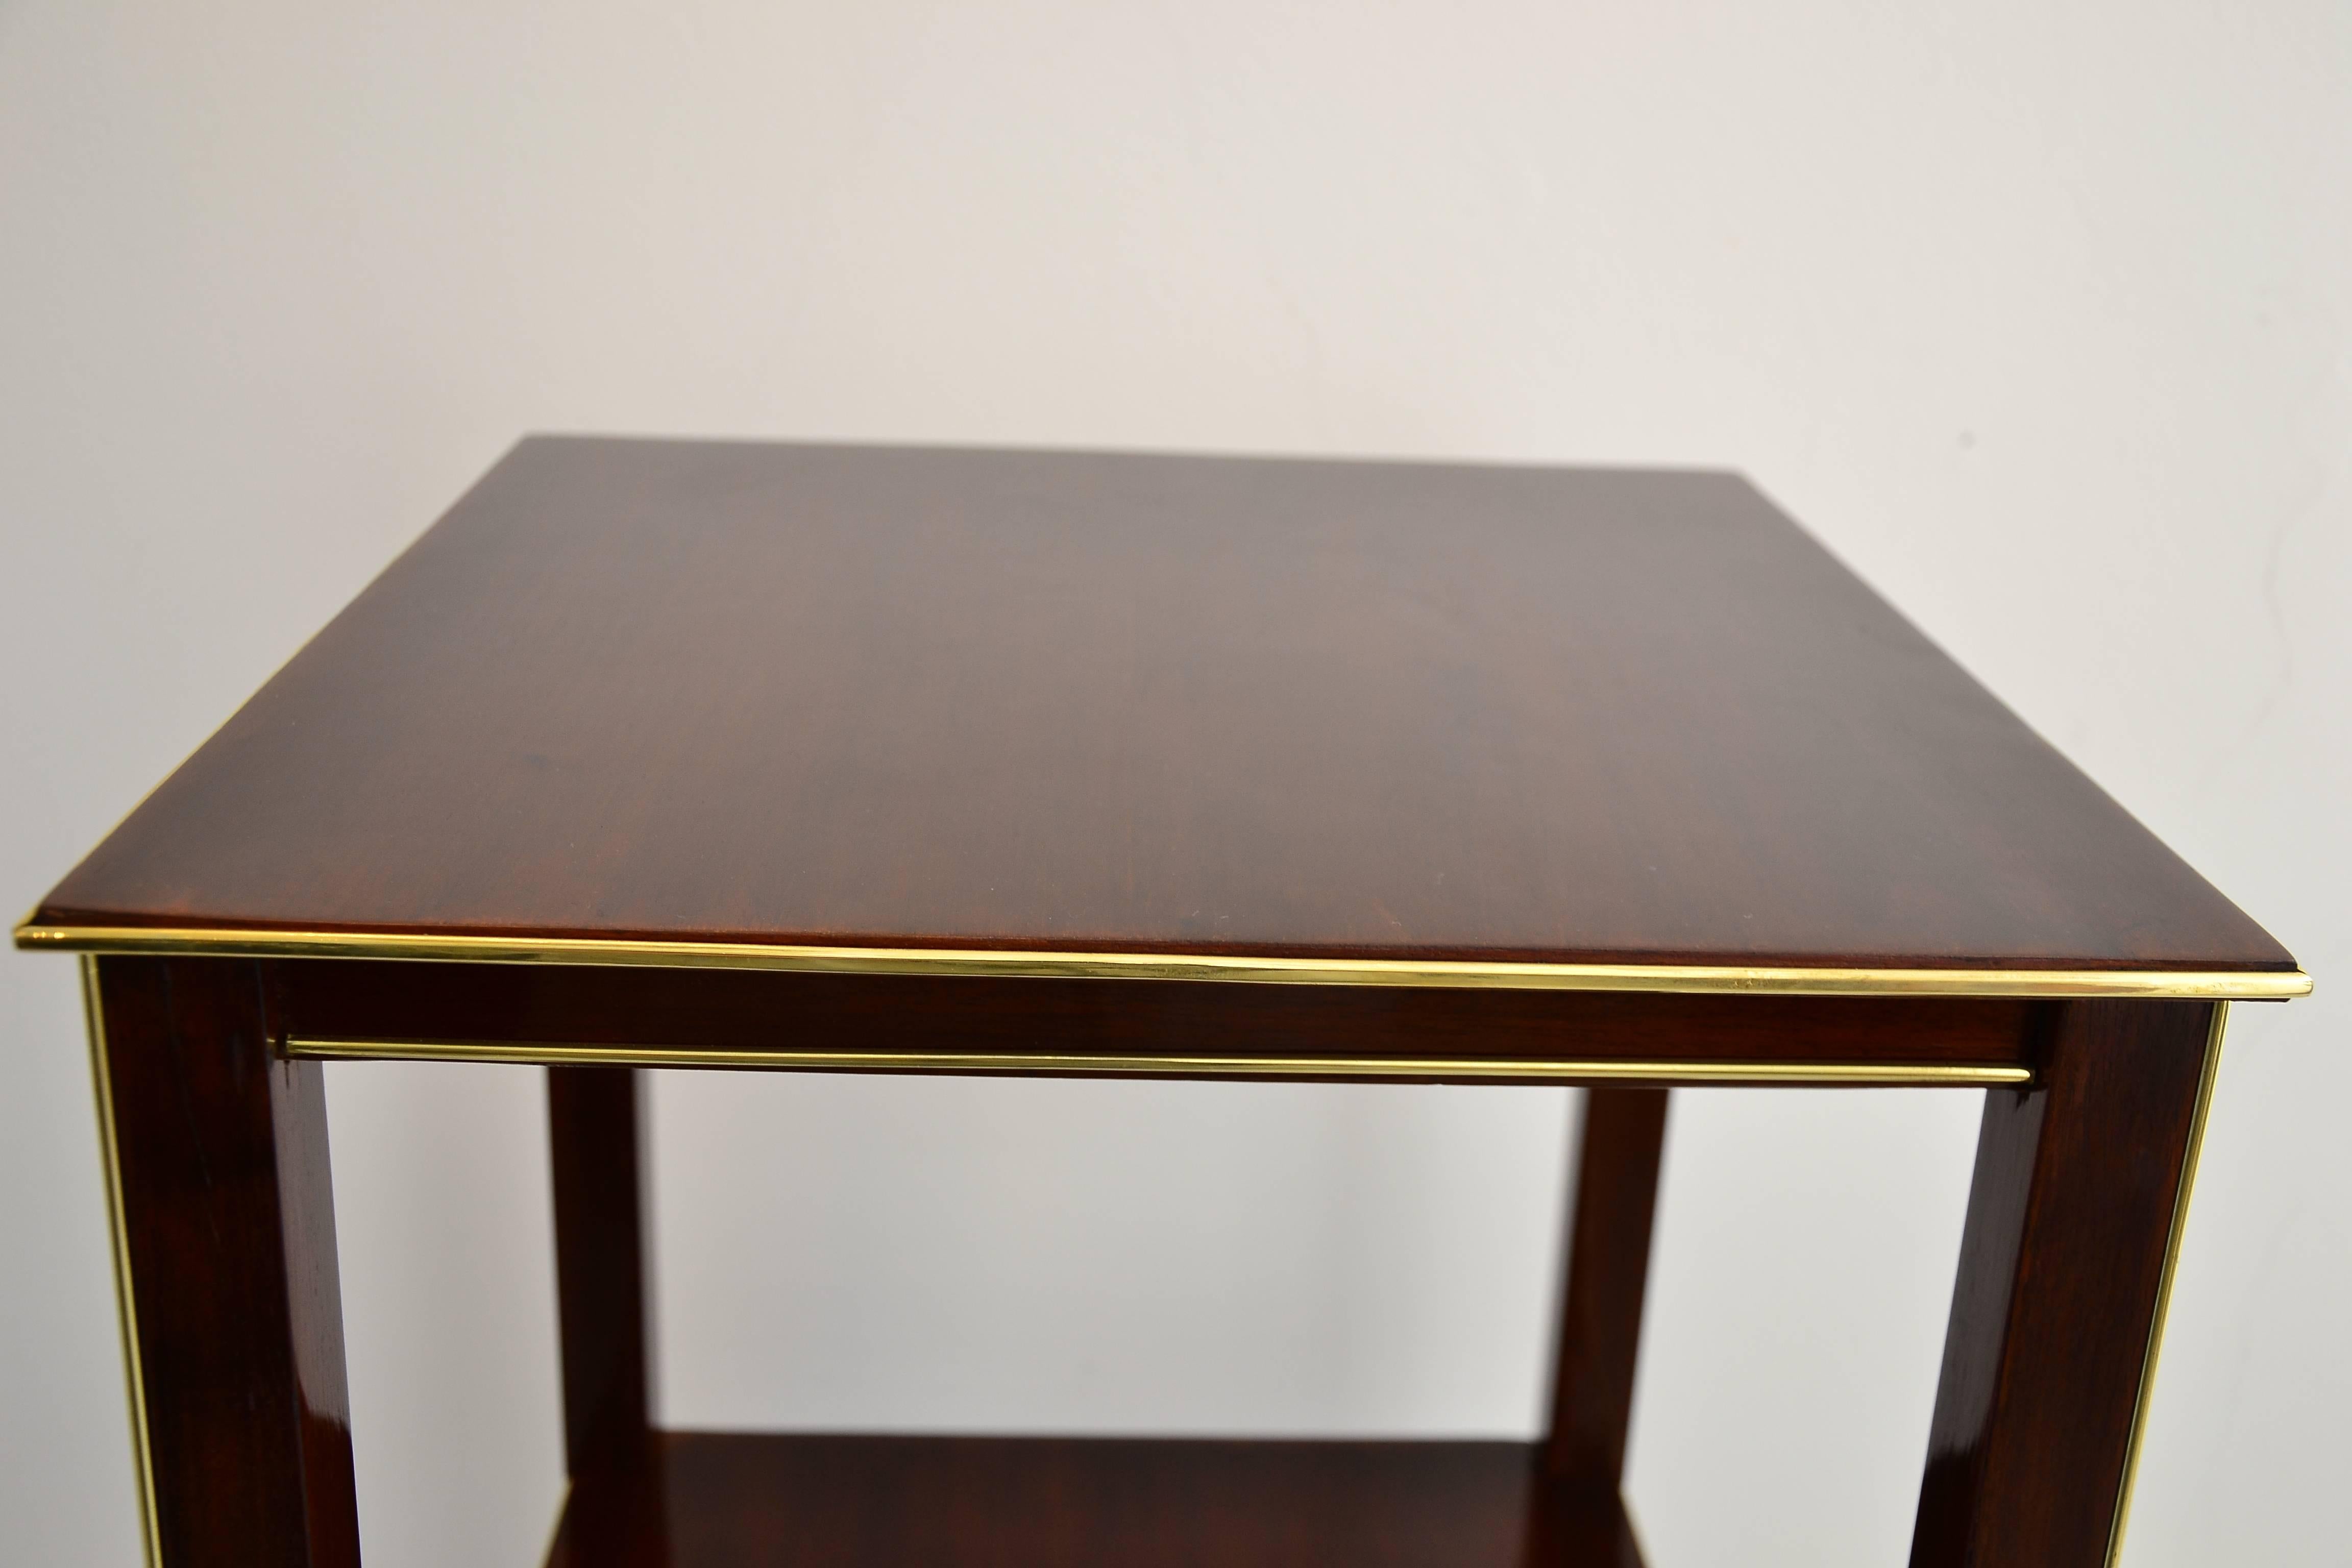 Austrian Art Deco Table Polished Nut Wood and Brass Inlaid, circa 1920